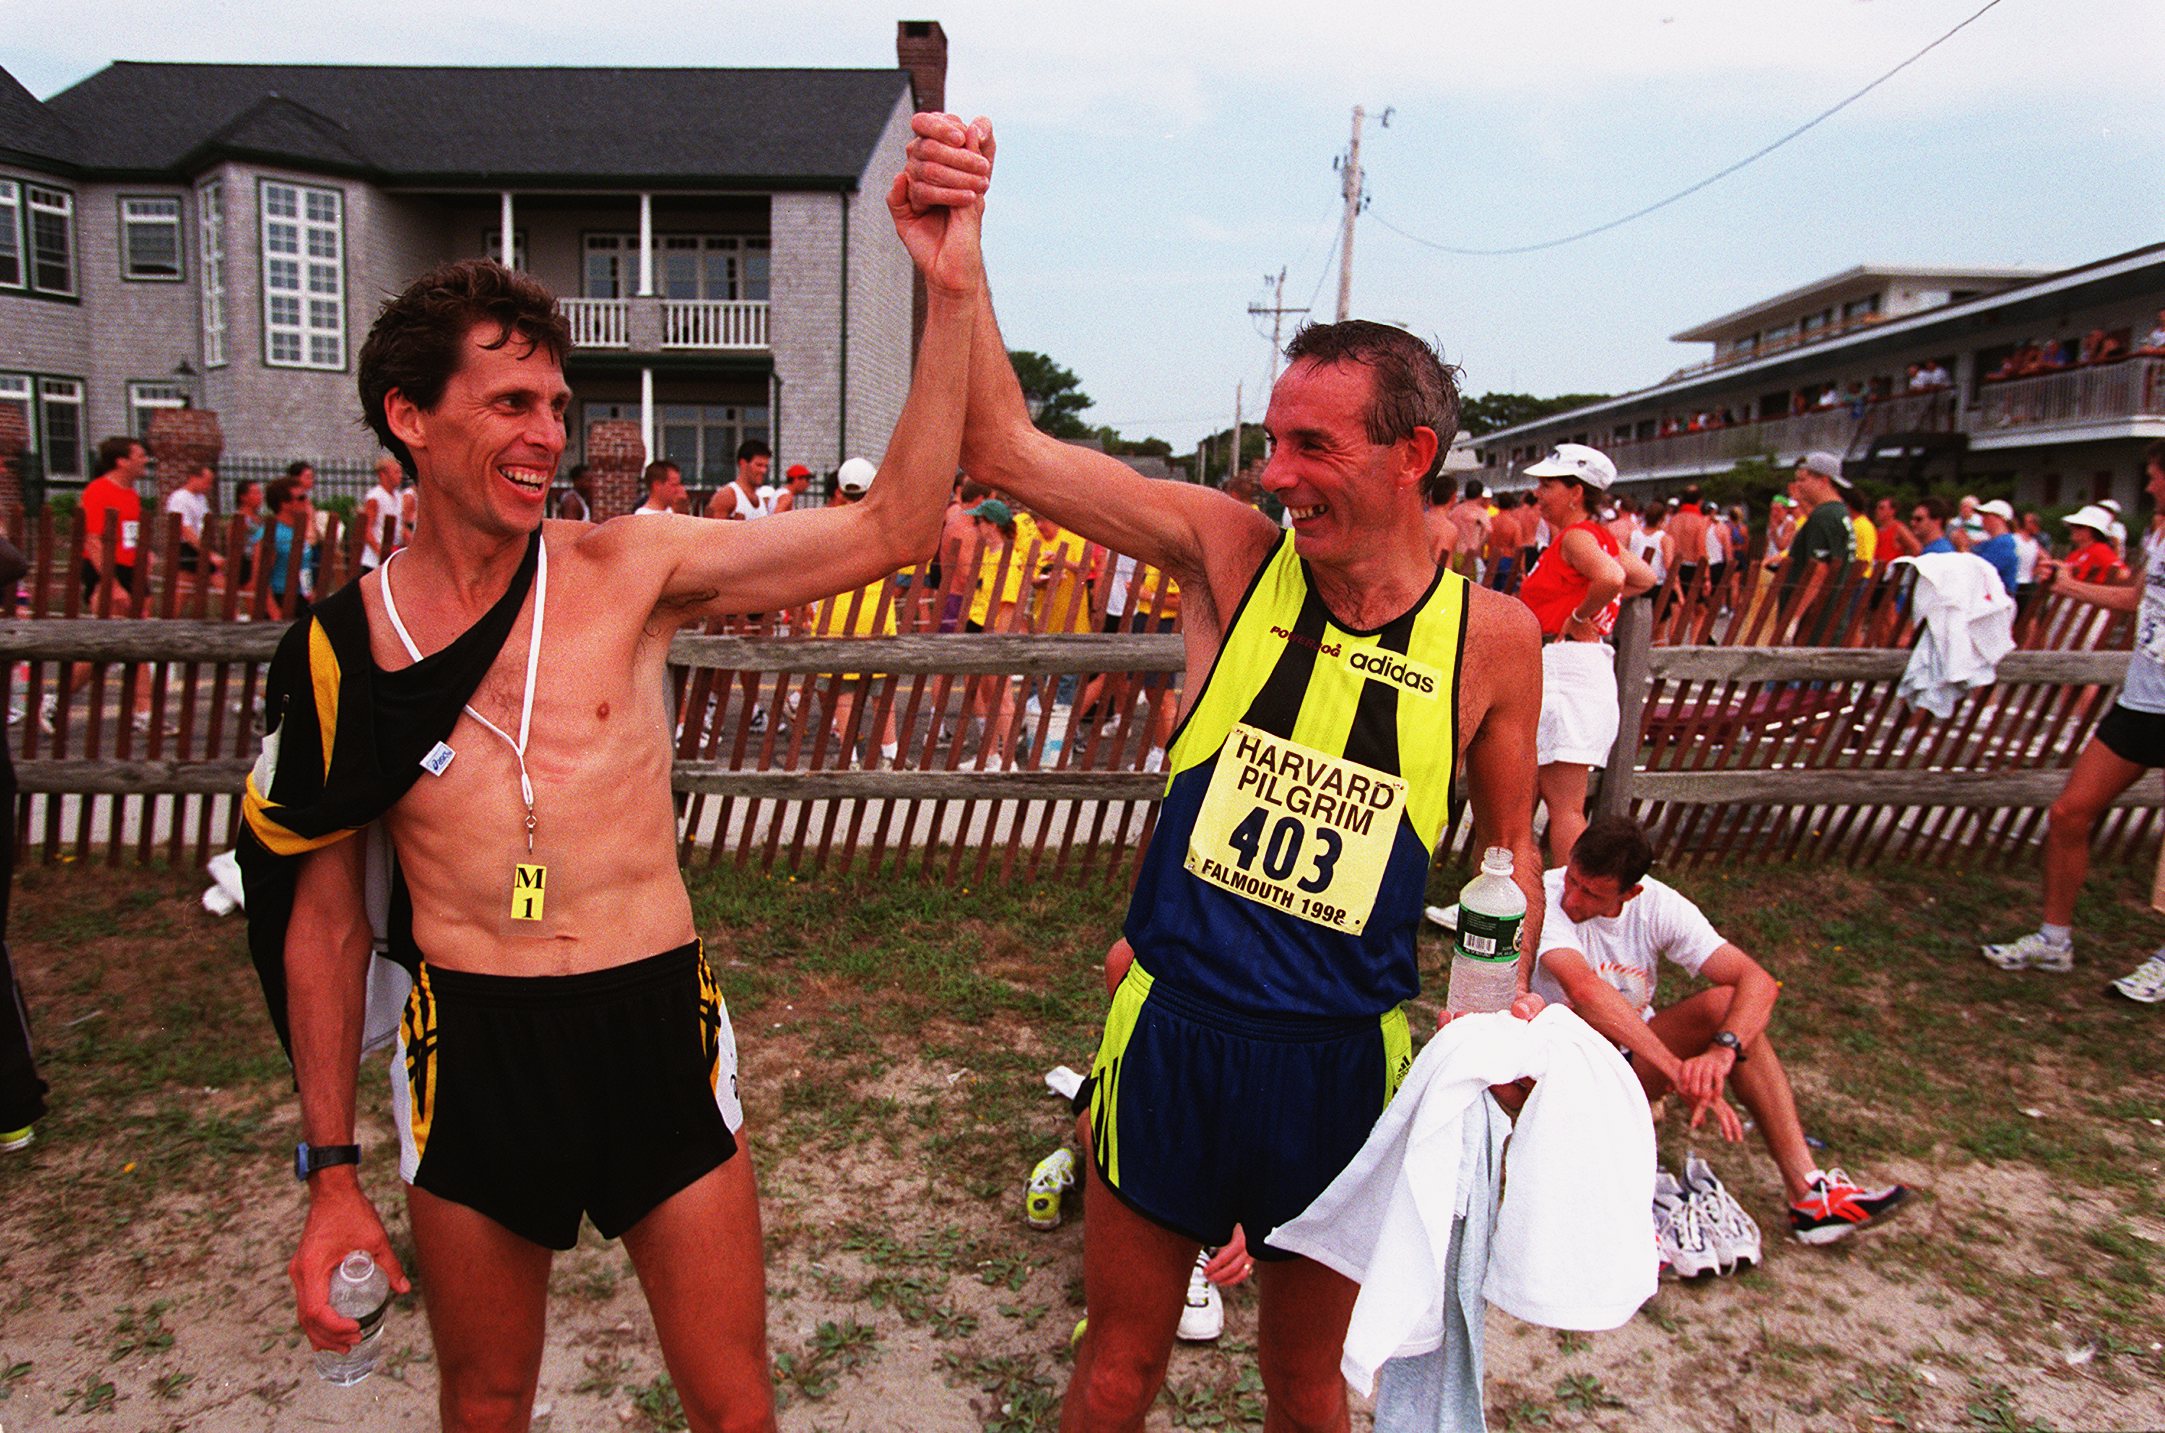 FALMOUTH - AUGUST 16: Master runners Steve Plasencia, left, and Keith Anderson, right, came in together to finish the Falmouth Road Race. (Photo by Evan Richman/The Boston Globe via Getty Images)